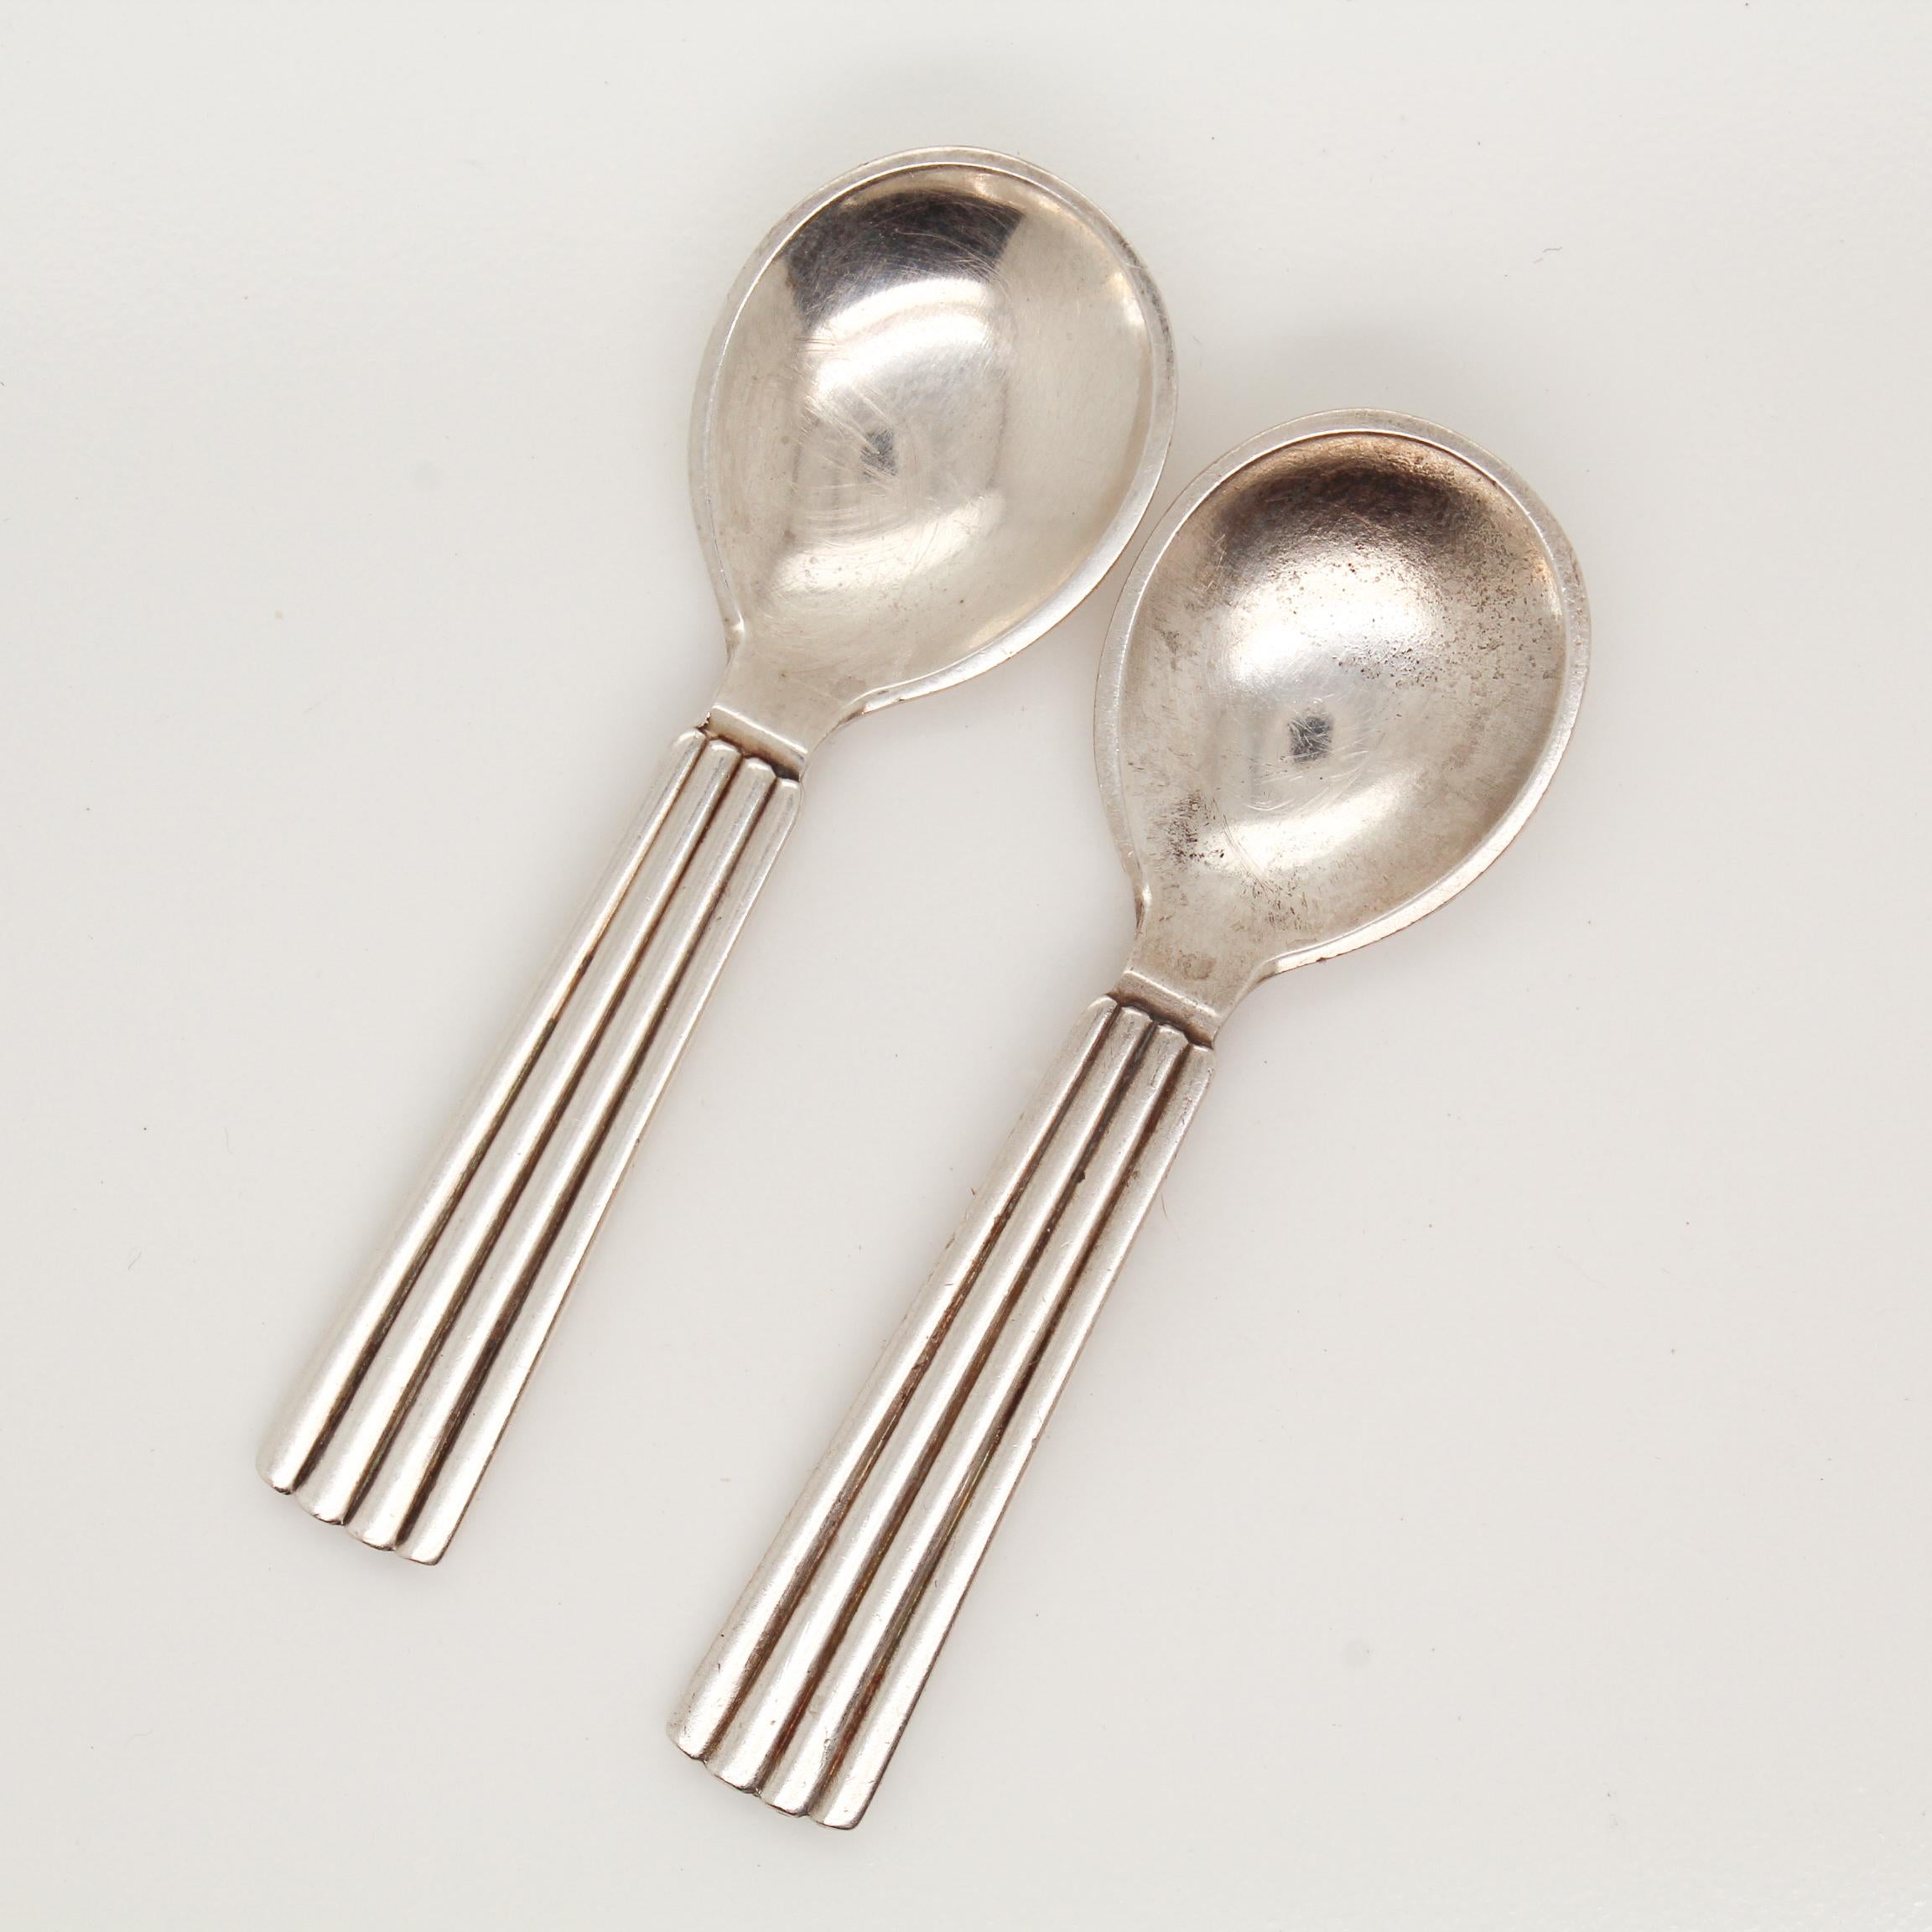 A pair of fine antique sterling silver salt spoons.

By Georg Jensen.

In the Bernadotte pattern. 

Designed by Sigvard Bernadotte.

Simply a wonderful pair of Jensen salt spoons!

Date:
20th Century

Overall Condition:
They are in overall good,